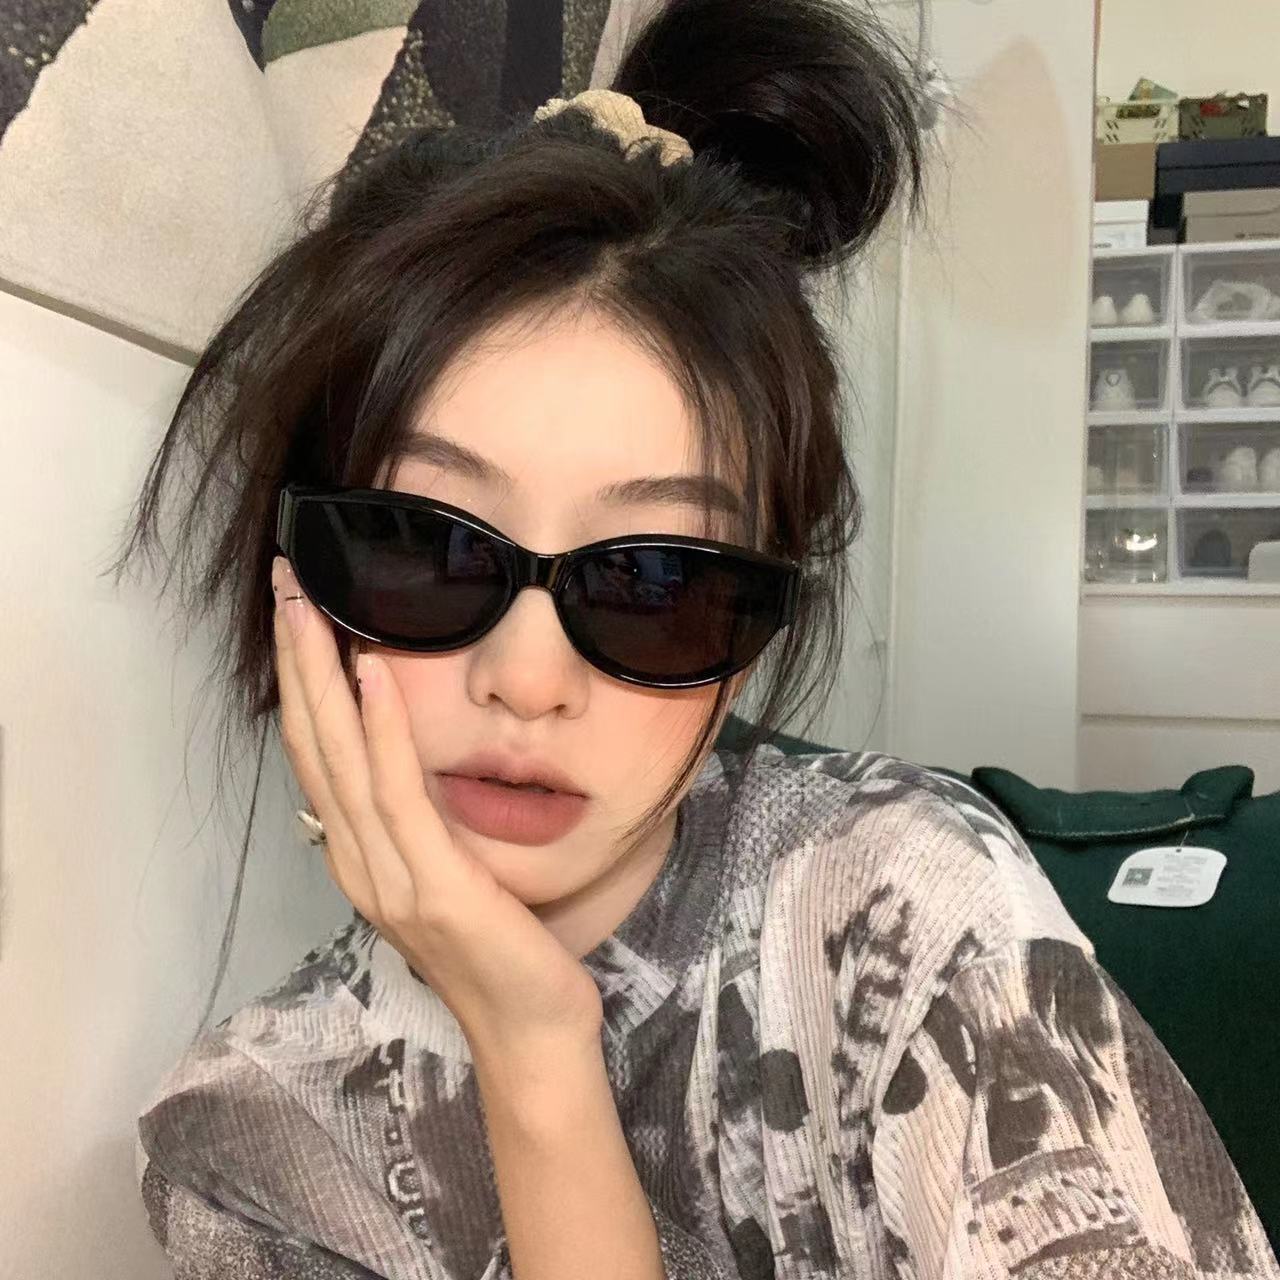 Cross-Border European and American Personalized Sunglasses New Retro Hip Hop Oval Sunglasses Best-Seller on Douyin Trendy Fashionable Sunglasses